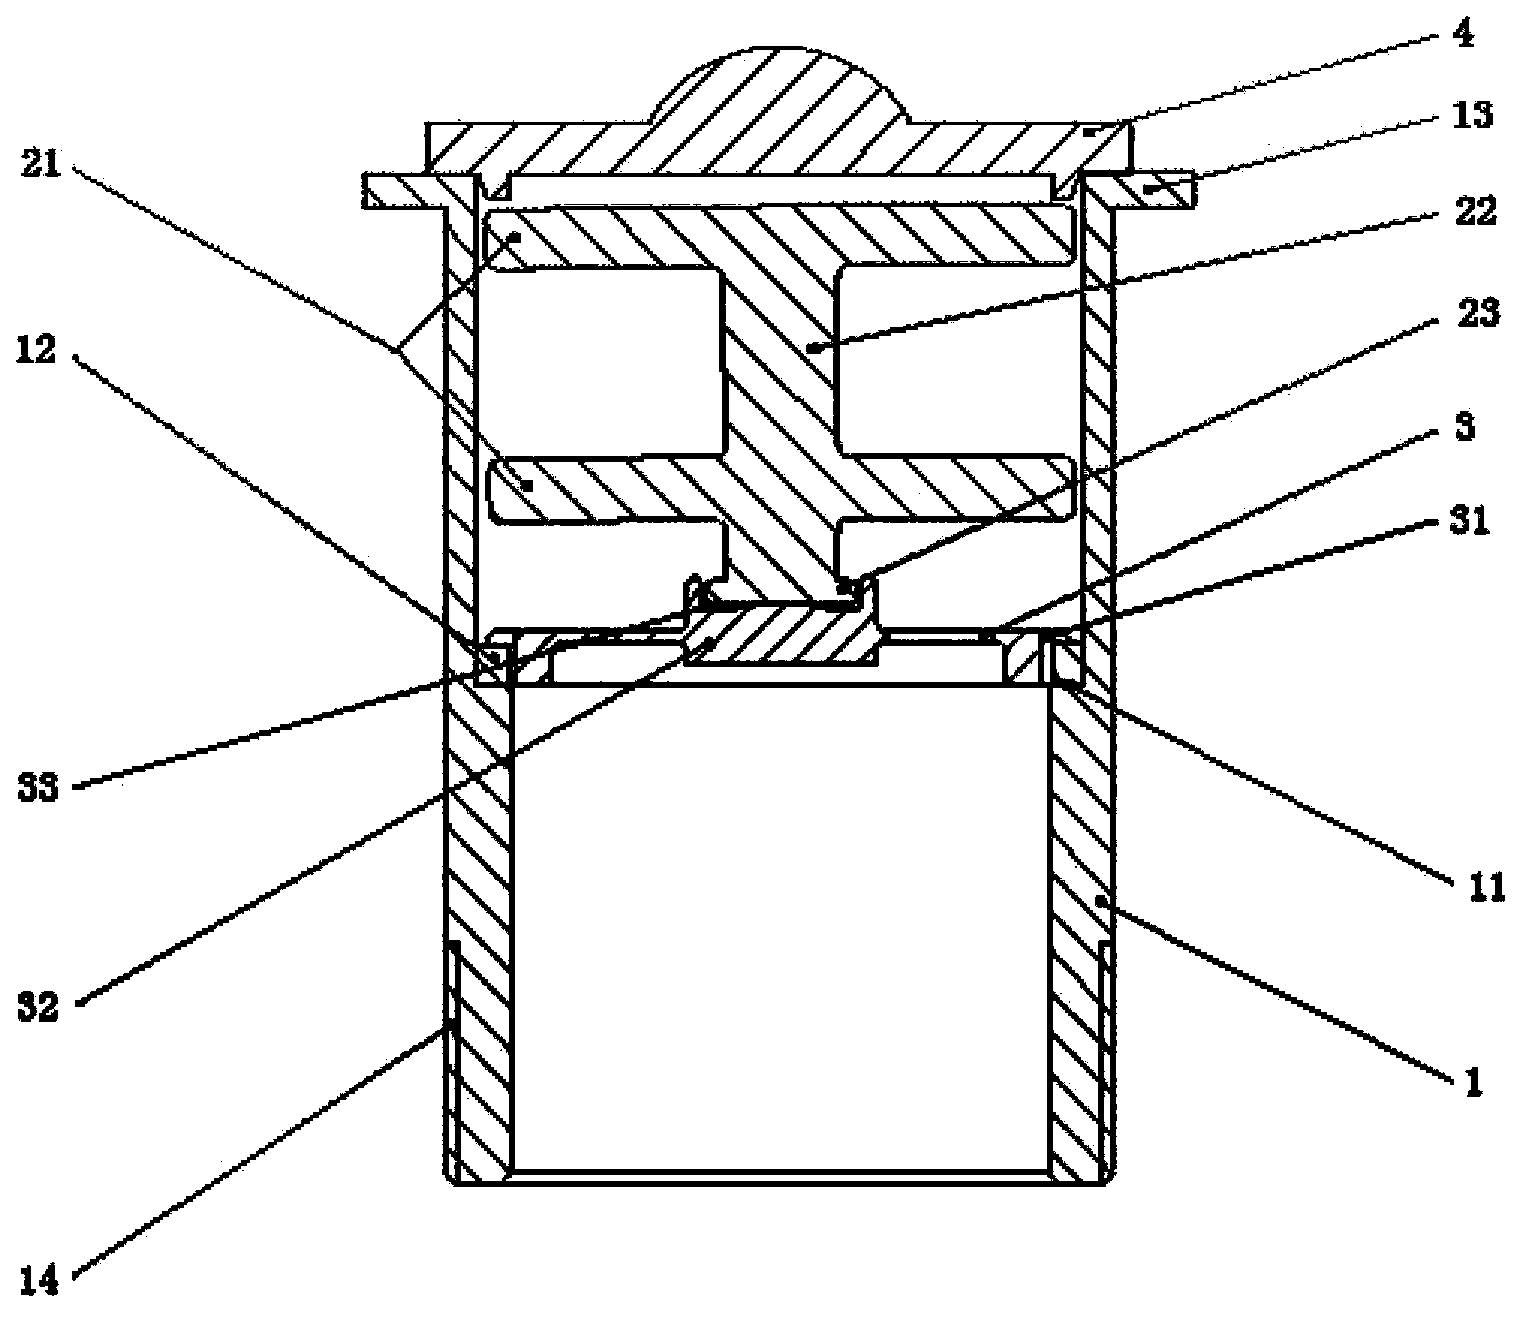 Drainer based on rotary draining core structure